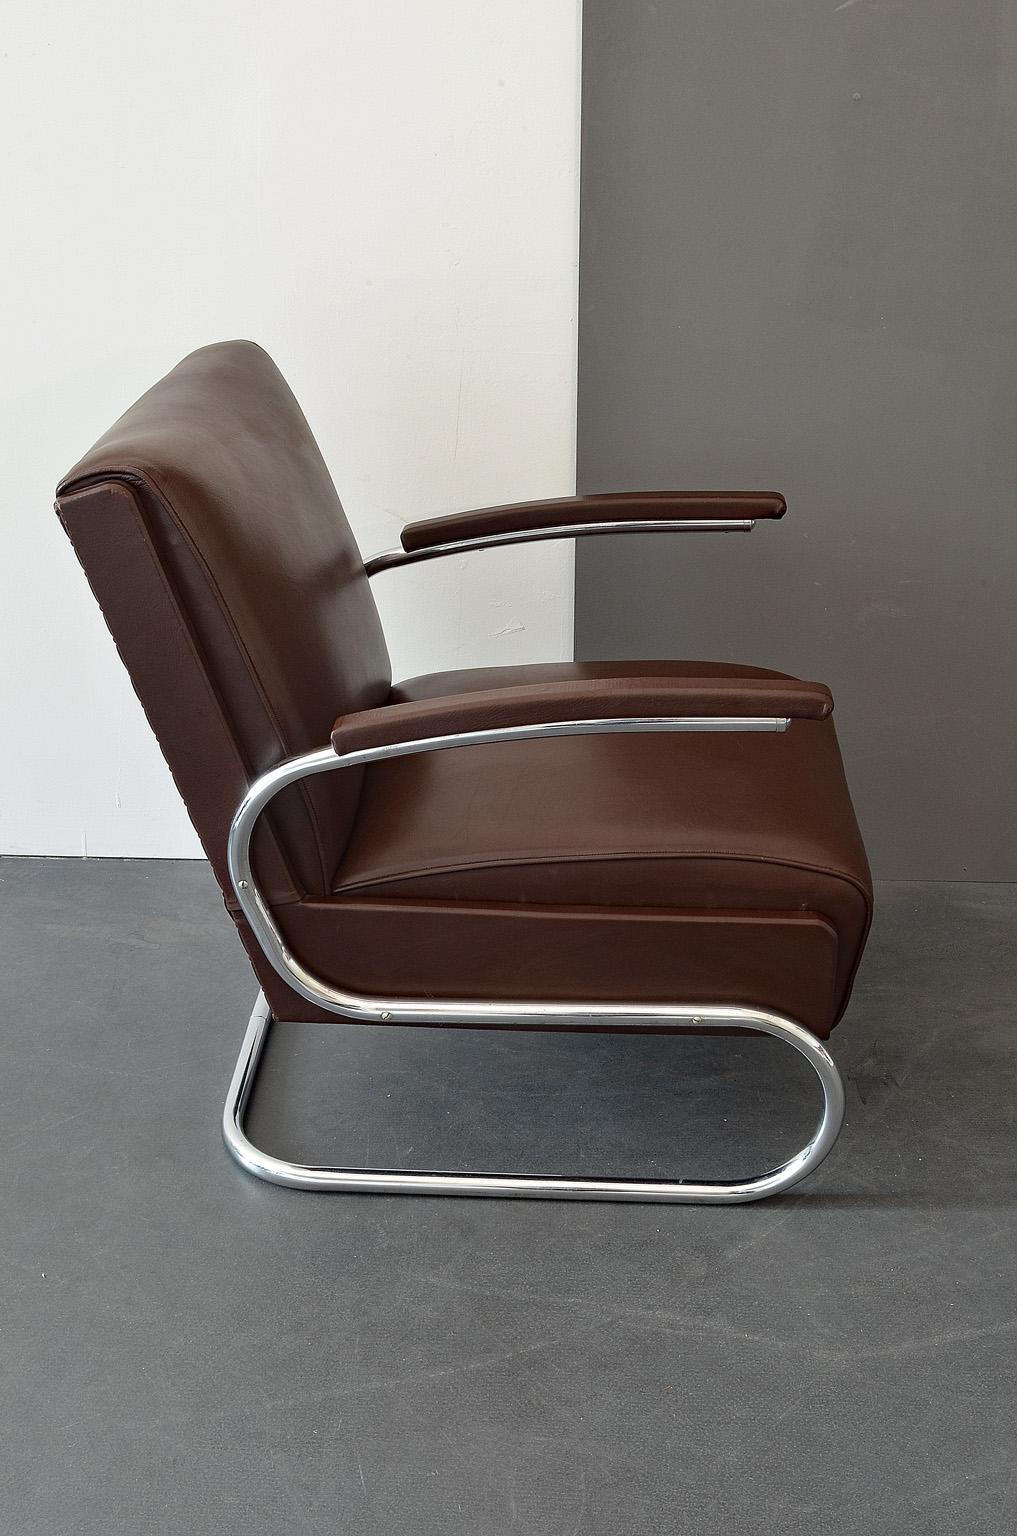 Art Deco Armchair or Cantilever Tubular Steel Brown Leather from Mücke Melder, 1930s For Sale